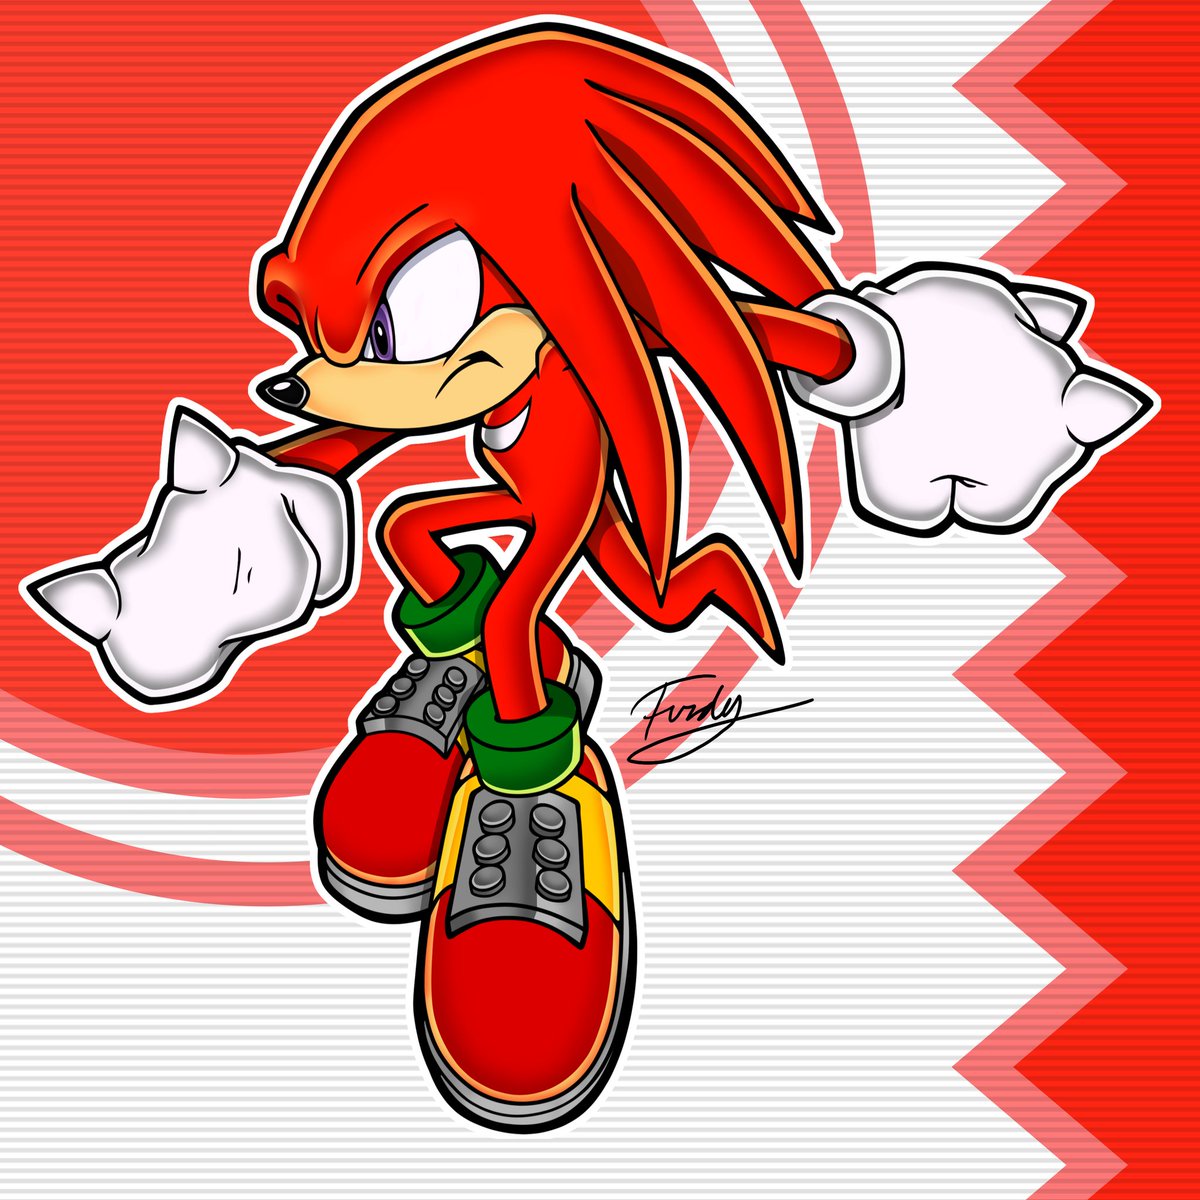 Heres a boy drew recently #Knuckles.